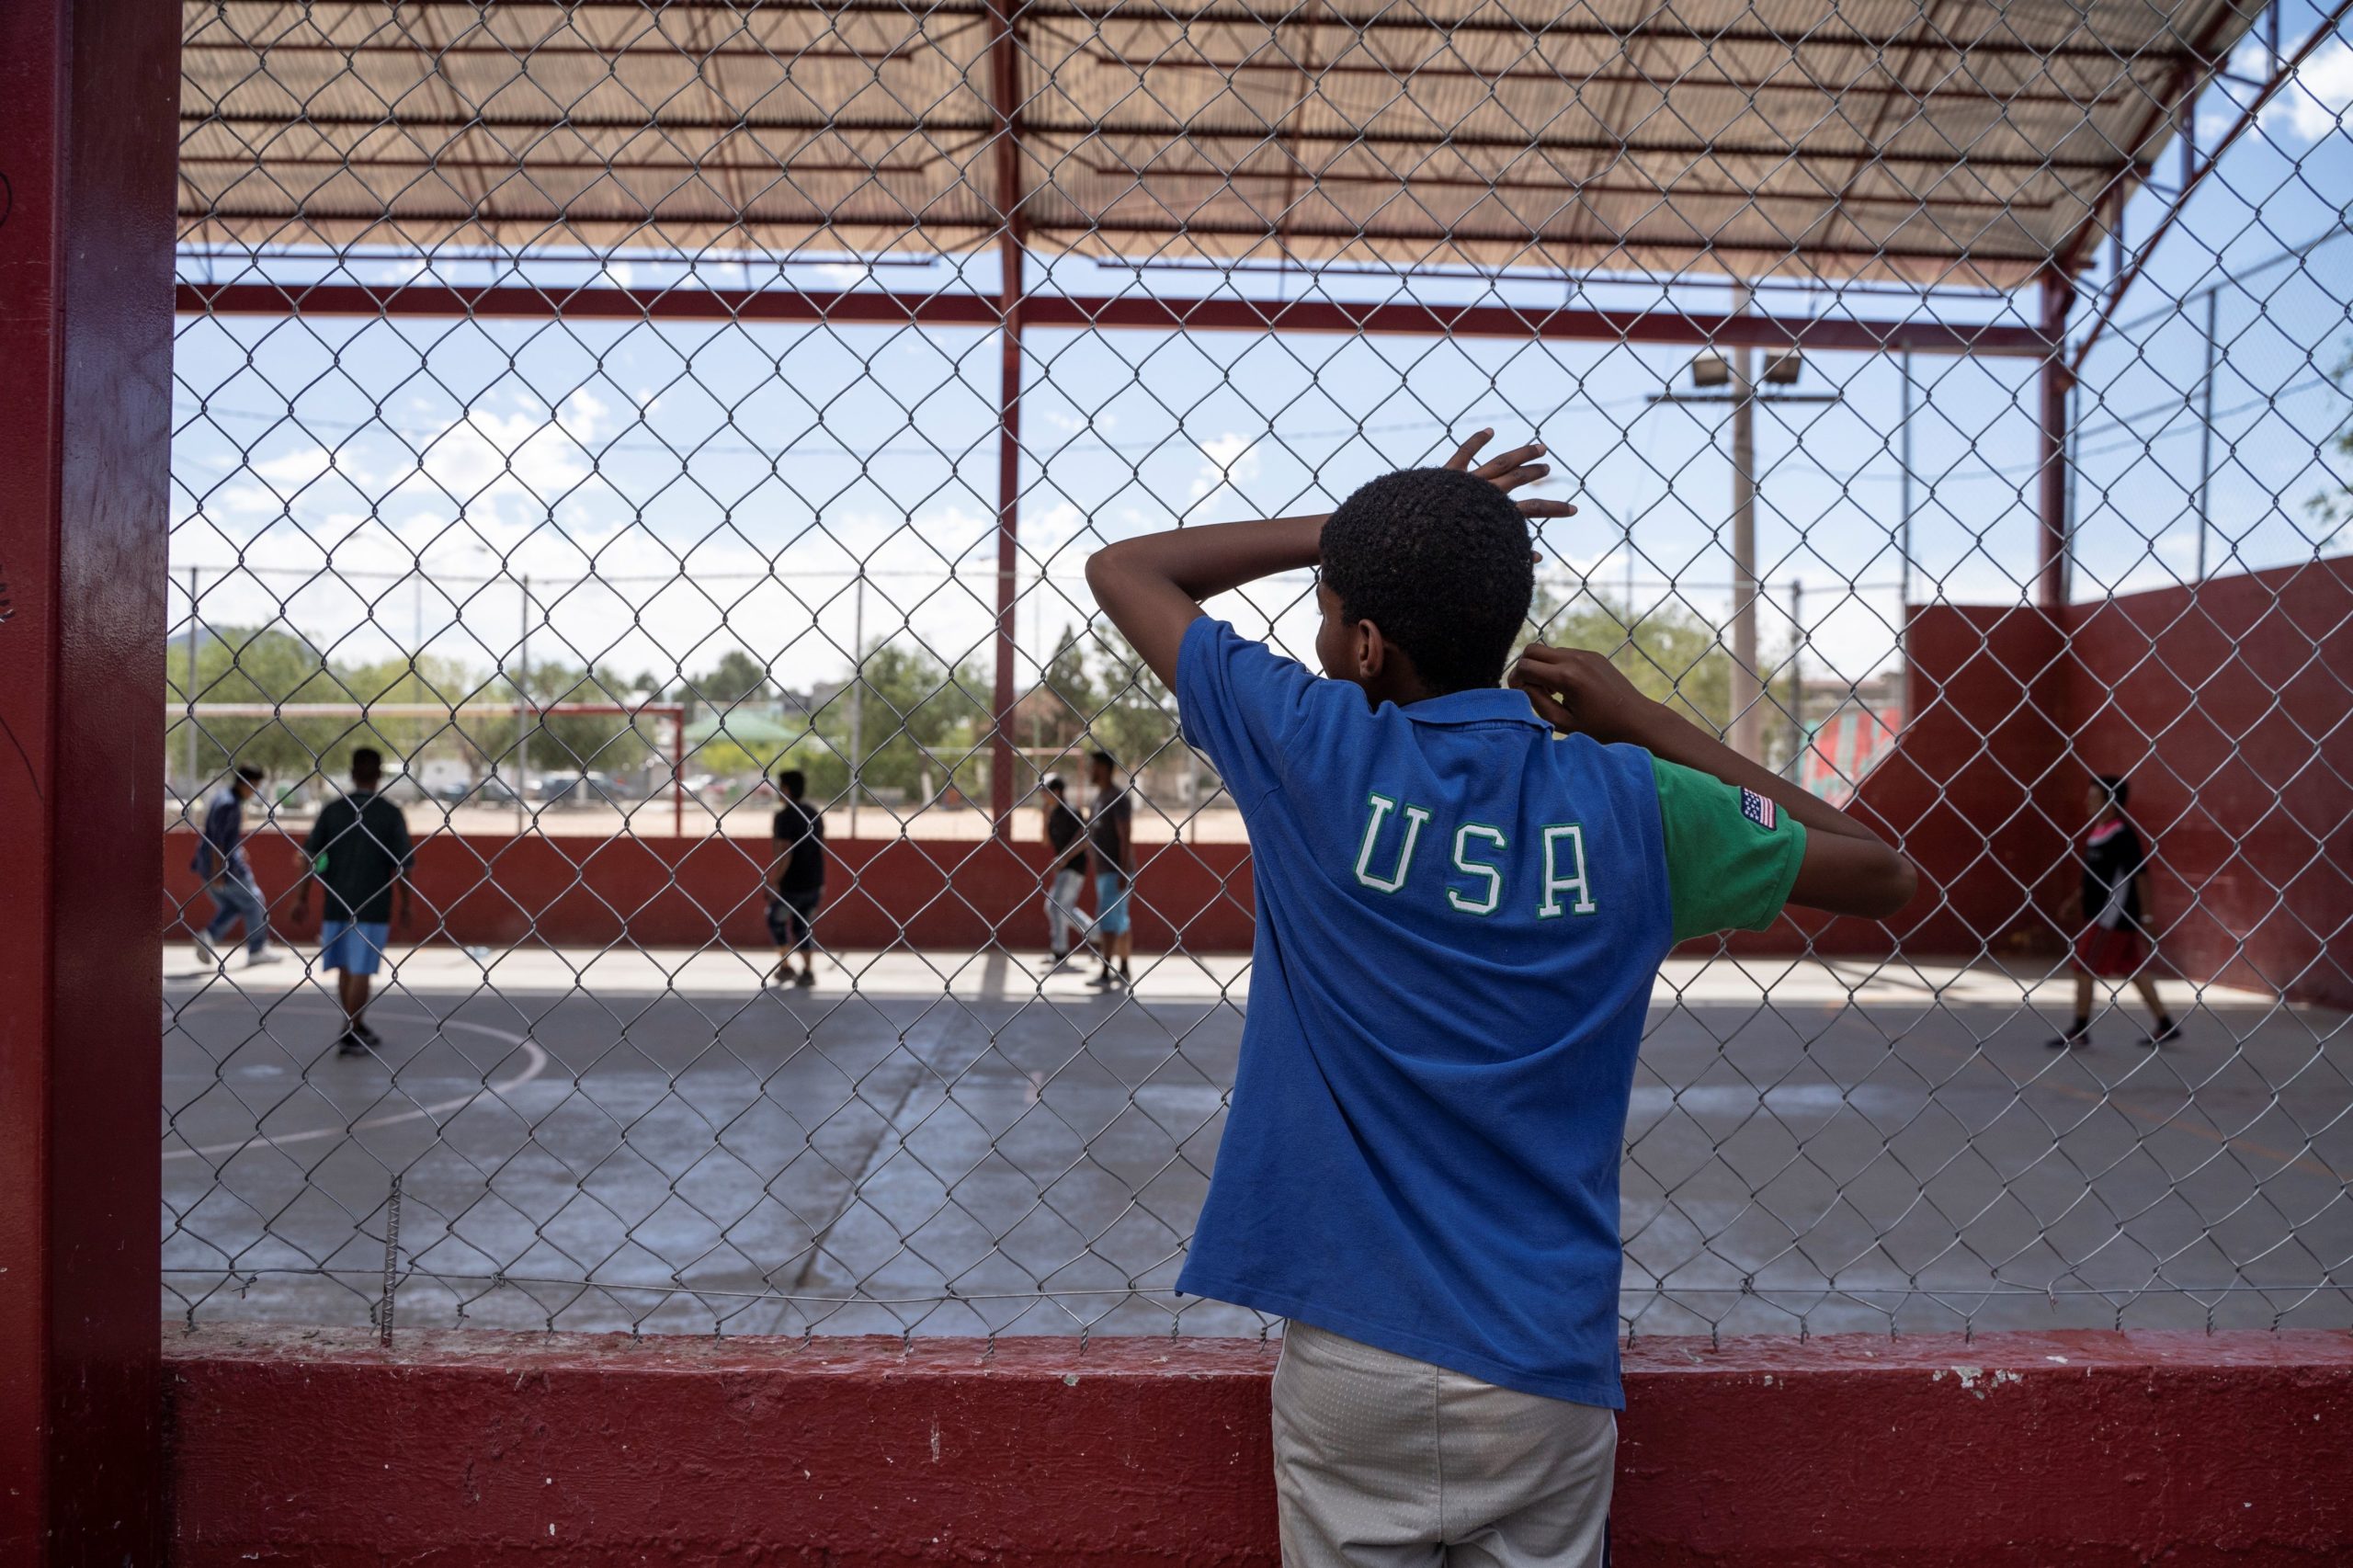 TOPSHOT - One of the residents of Iglesia Metodista "El Buen Pastor" migrant shelter watches the soccer match at a park near the shelter on June 09, 2019. (Photo credit should read PAUL RATJE/AFP via Getty Images)